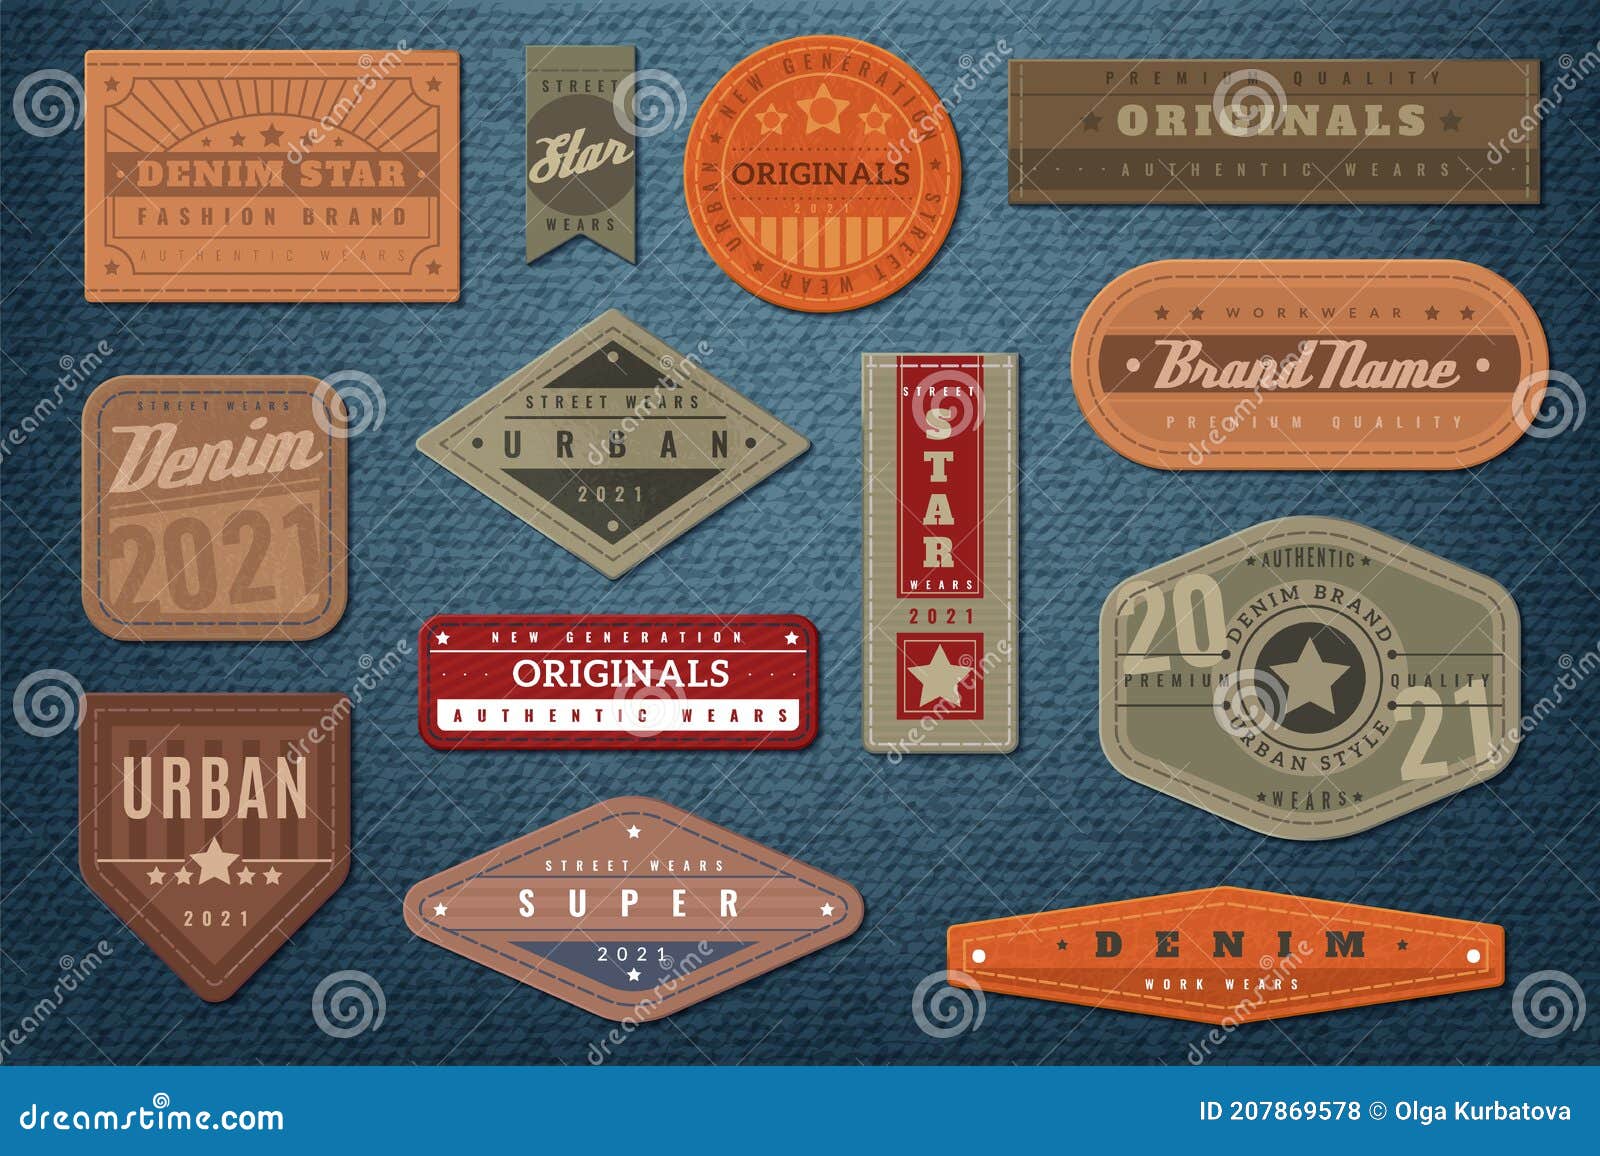 Denim Labels. Graphic Leather Badge and Textured Background, Authentic ...